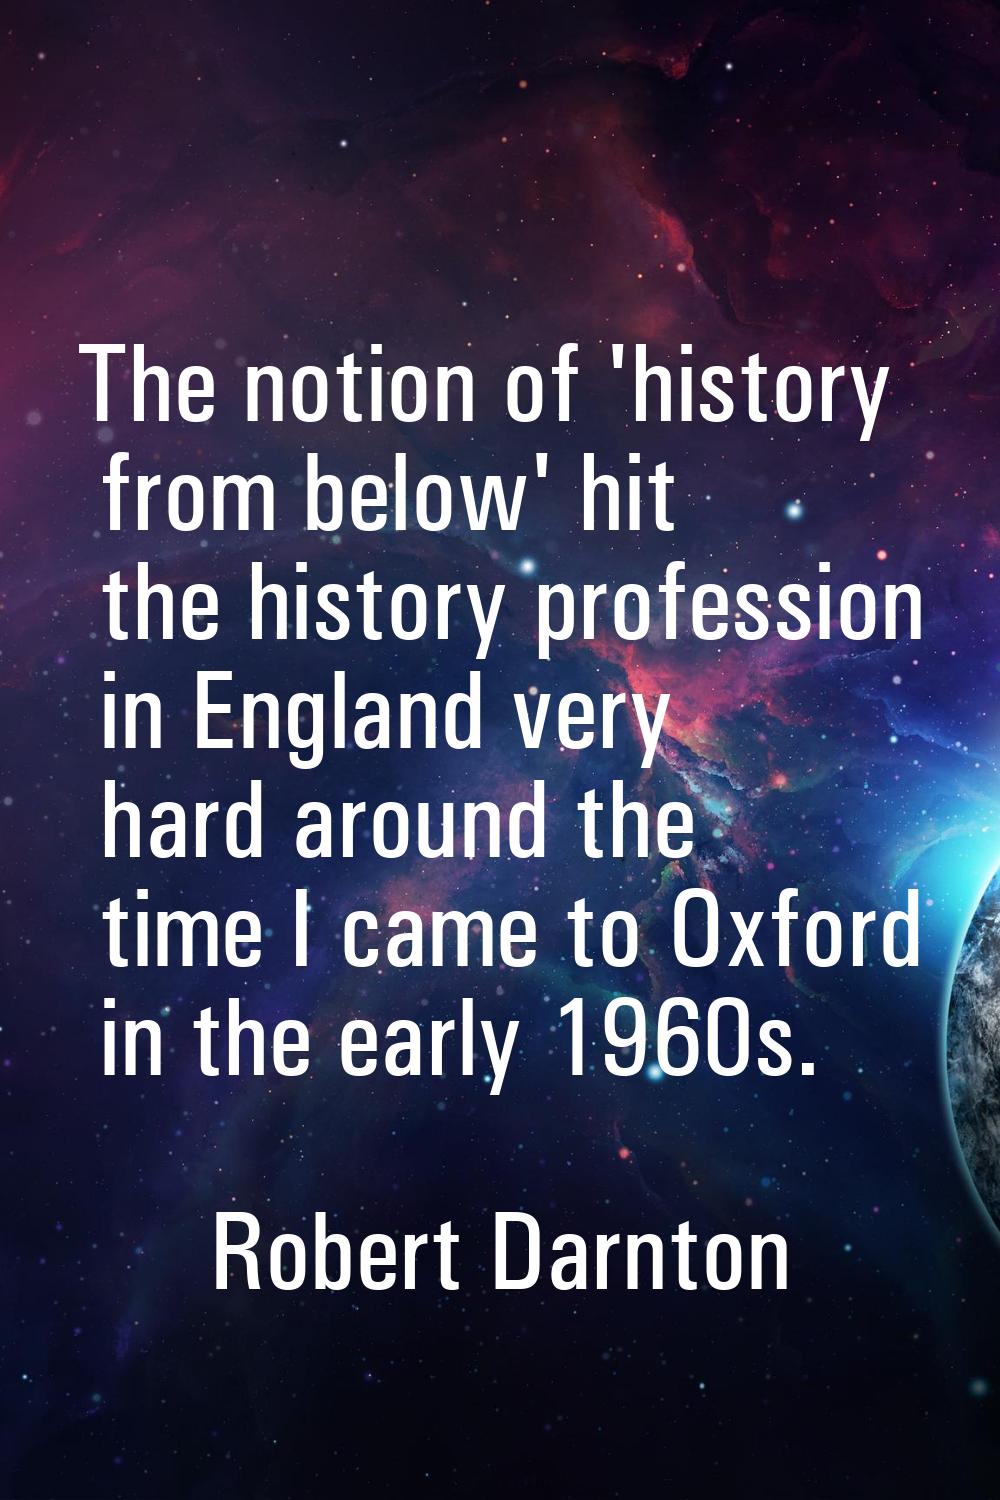 The notion of 'history from below' hit the history profession in England very hard around the time 